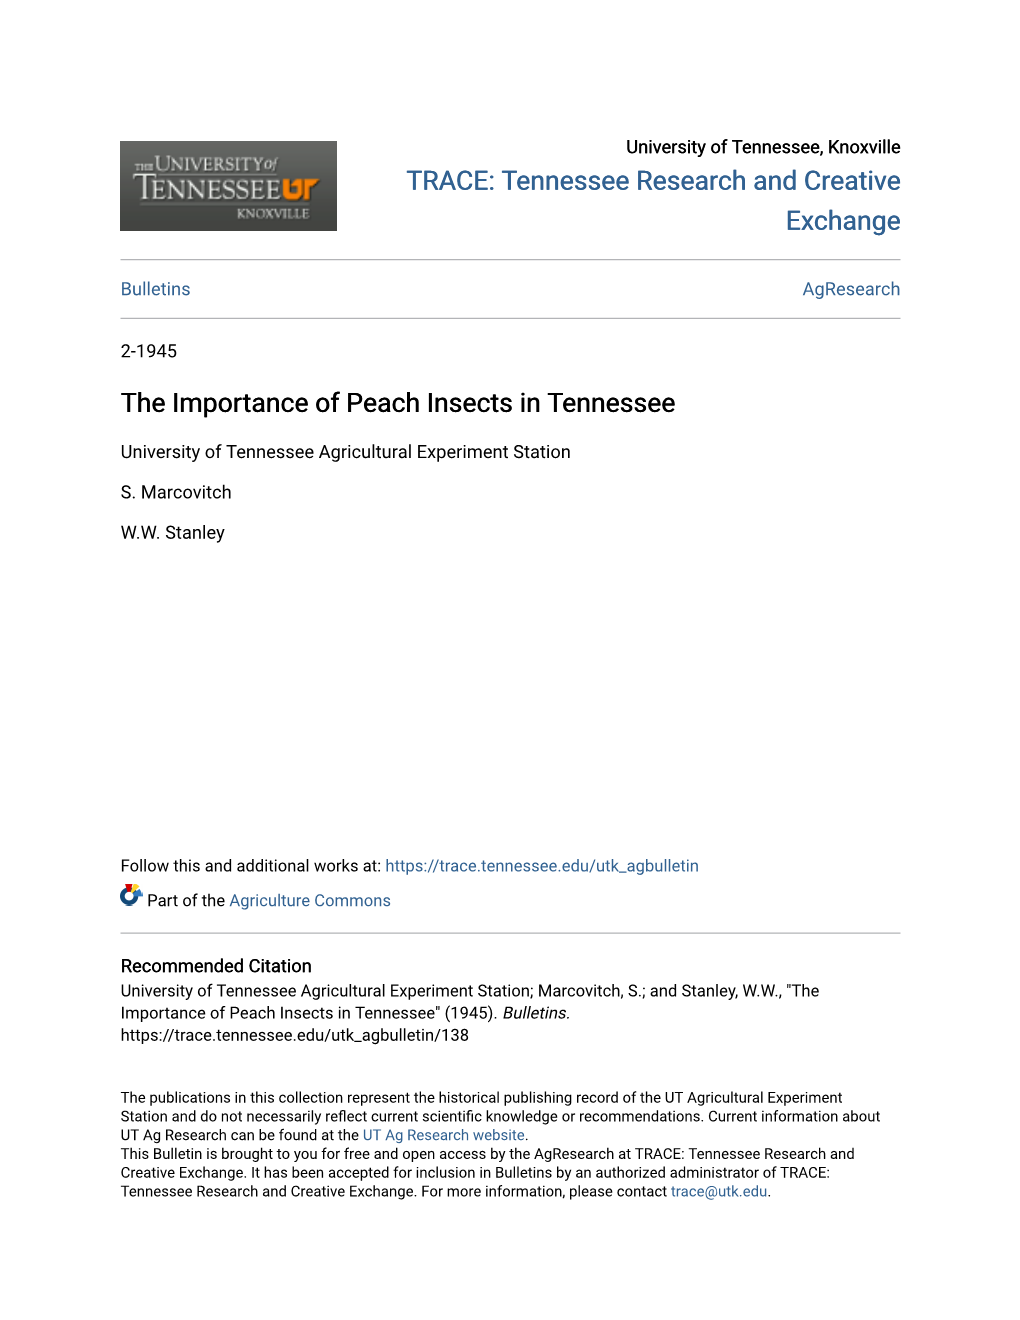 The Importance of Peach Insects in Tennessee